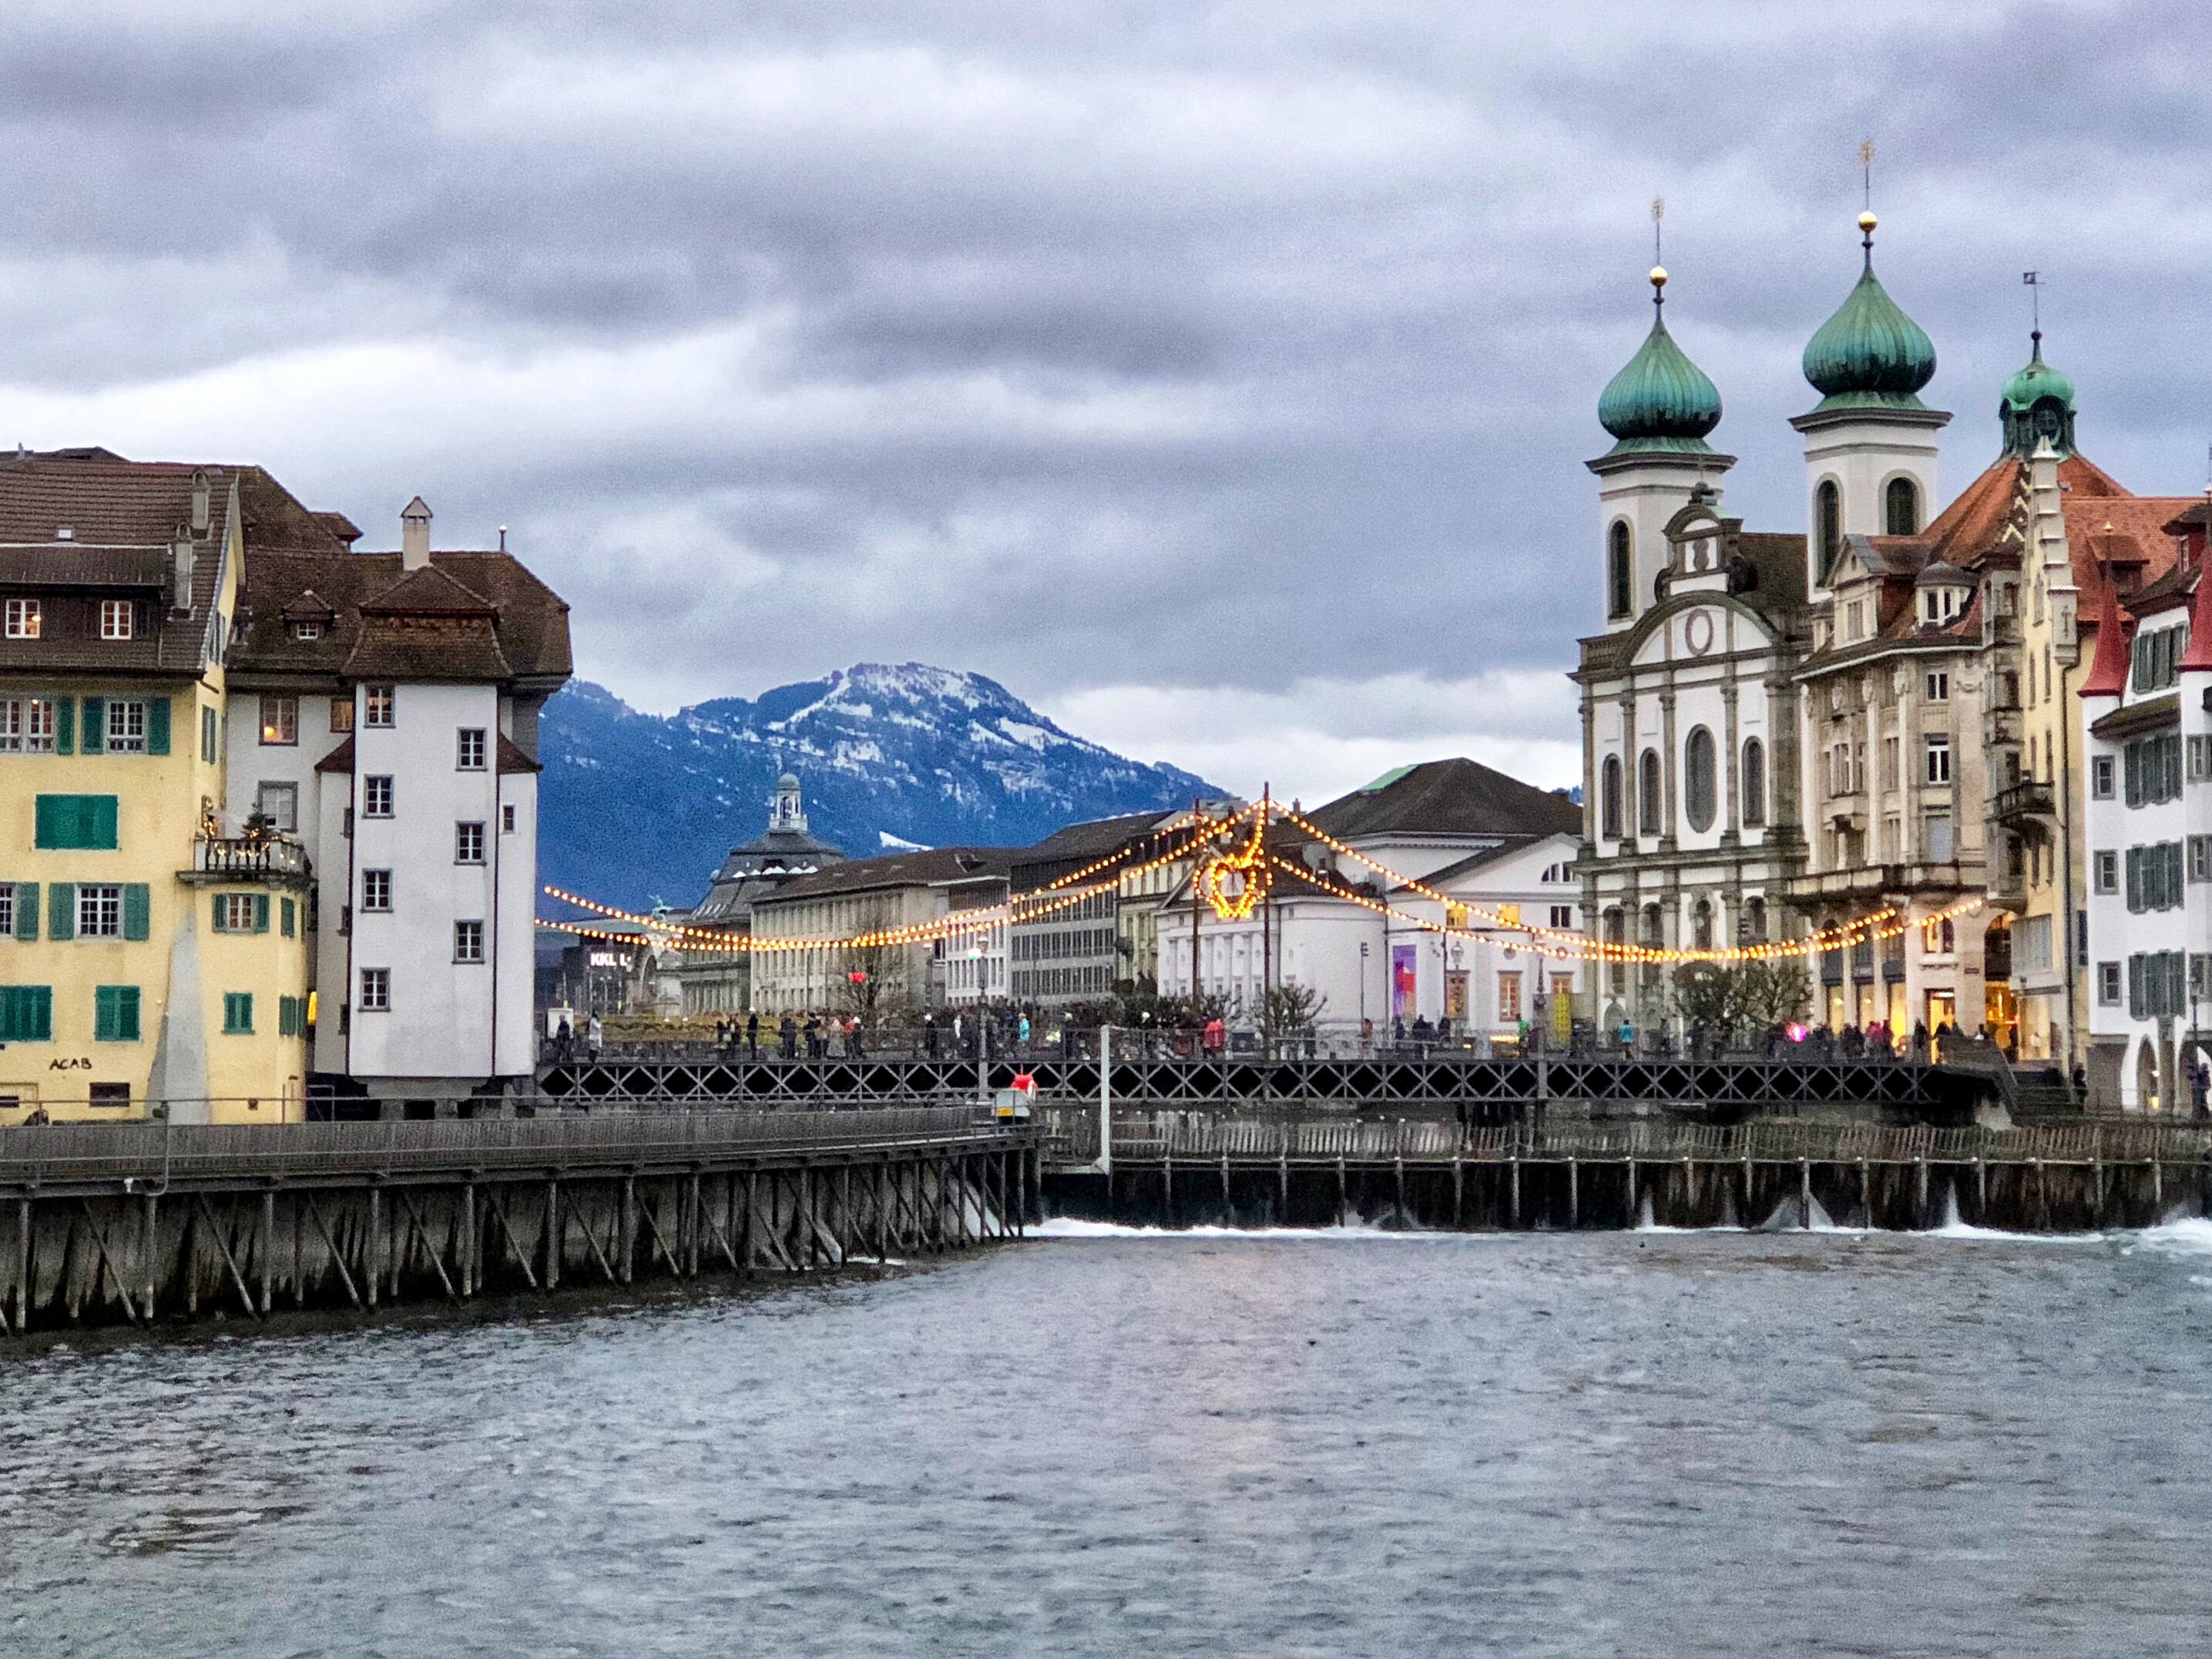 Lucerne, Switzerland, with the snowcapped mountains in the background.